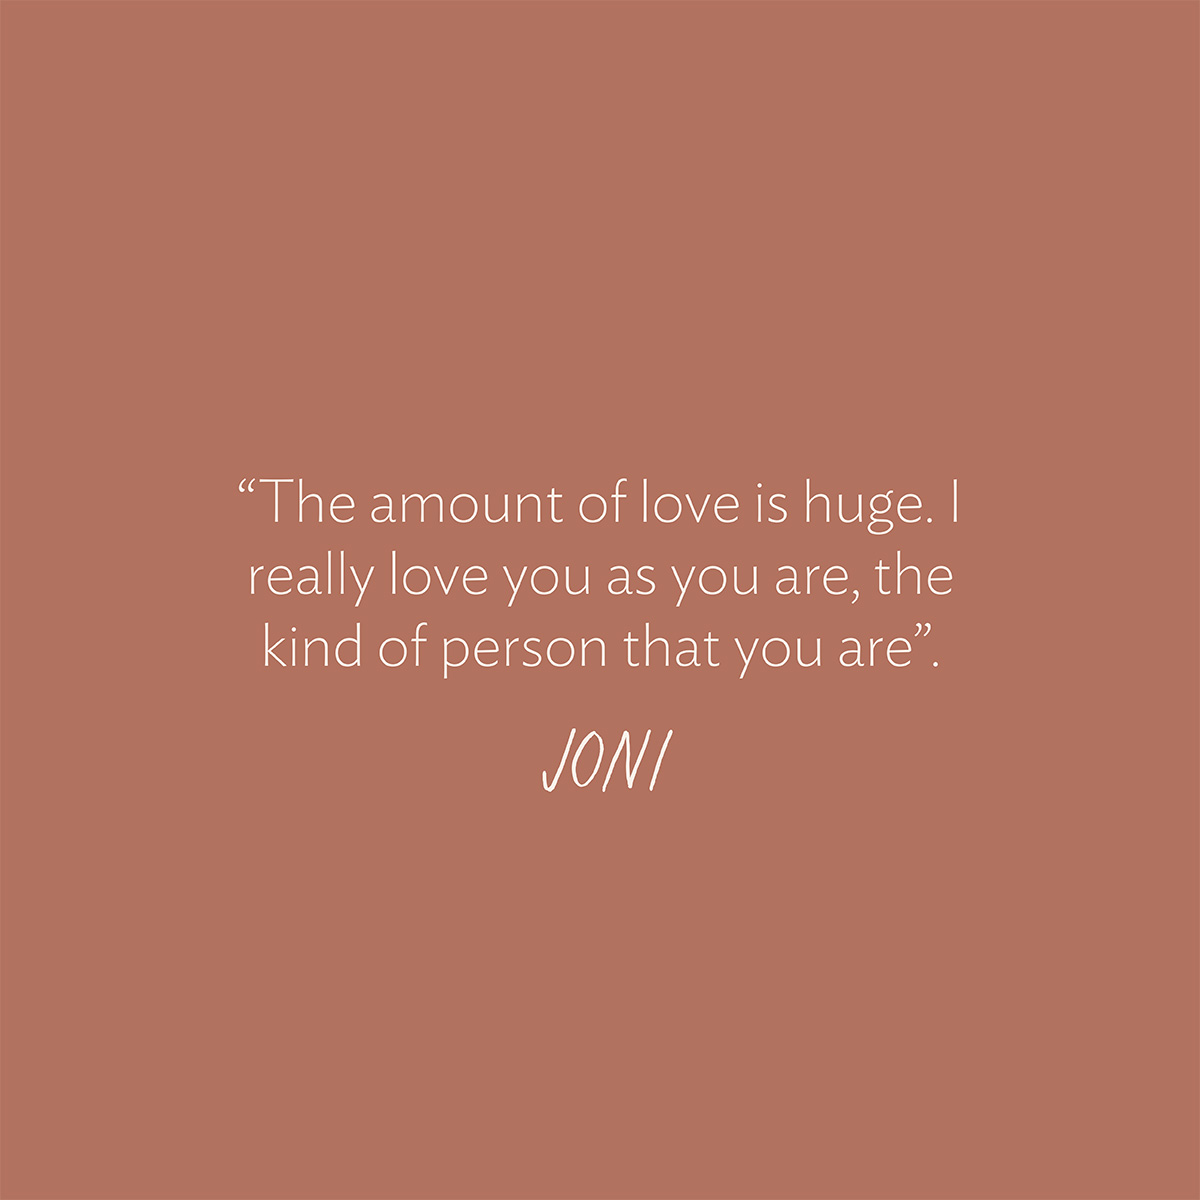 “The amount of love is huge. I really love you as you are, the kind of person that you are.” - Joni